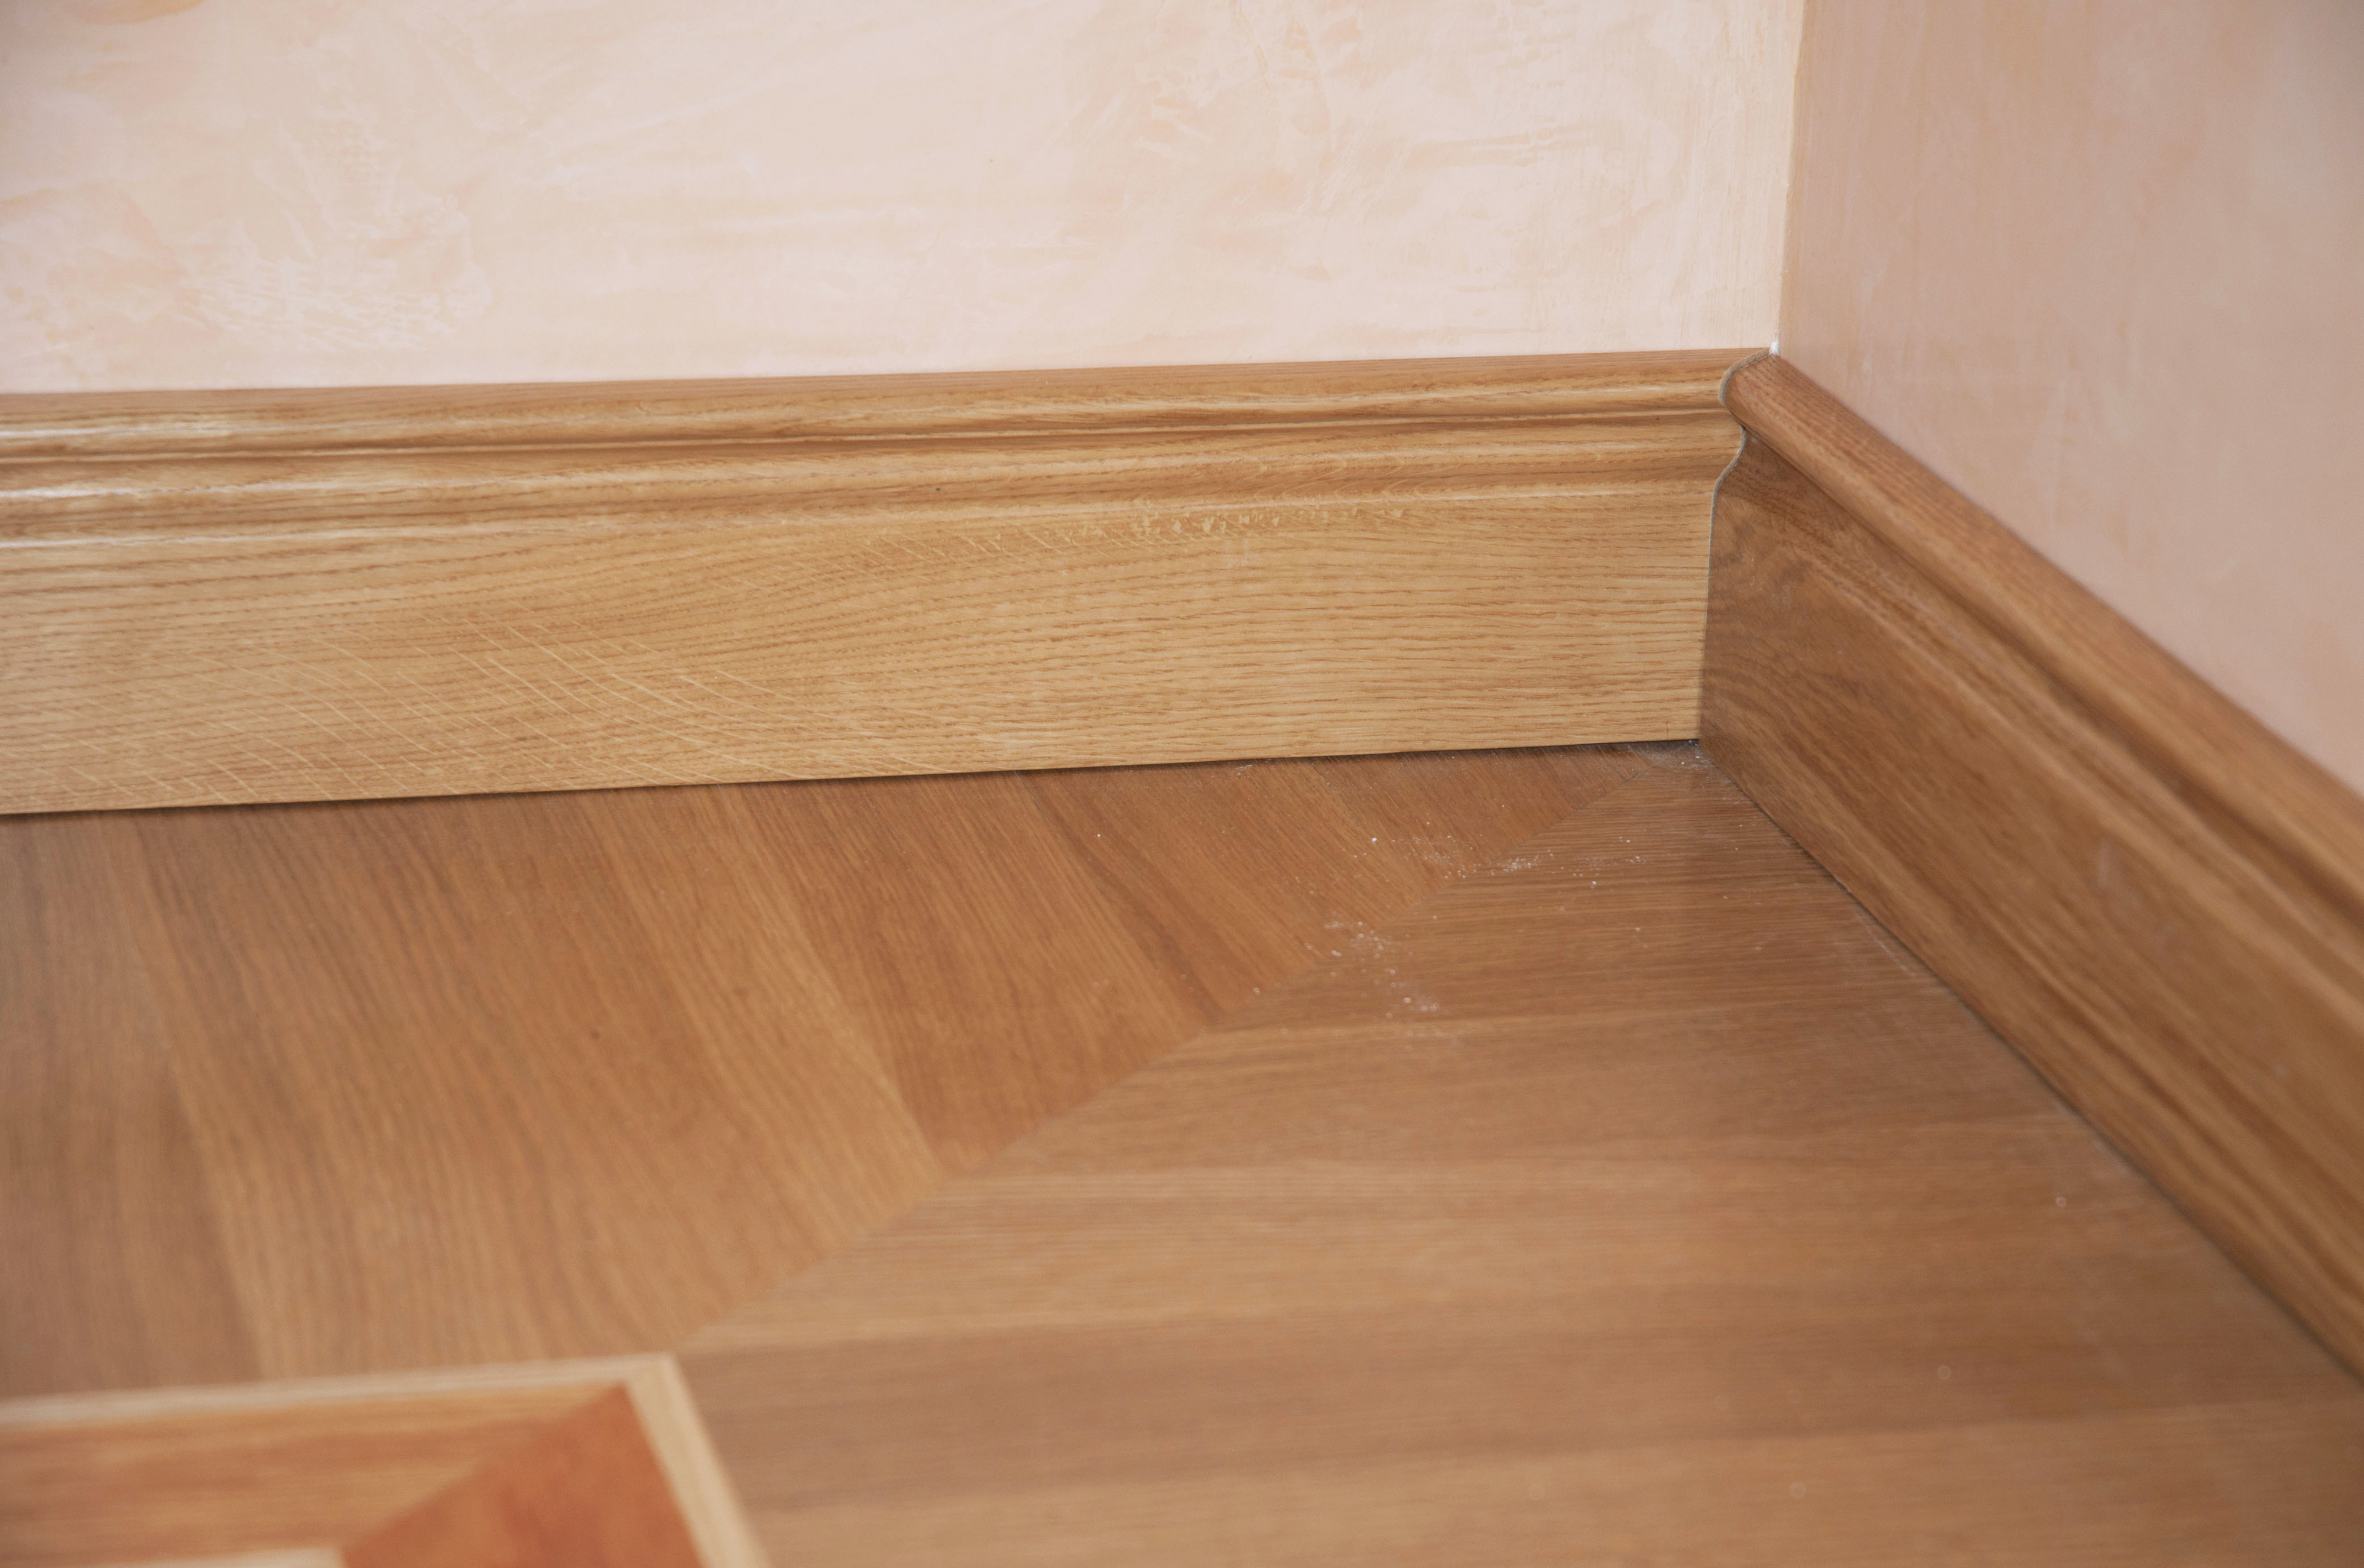 Wooden baseboard meeting a laminate floor in the corner of a room